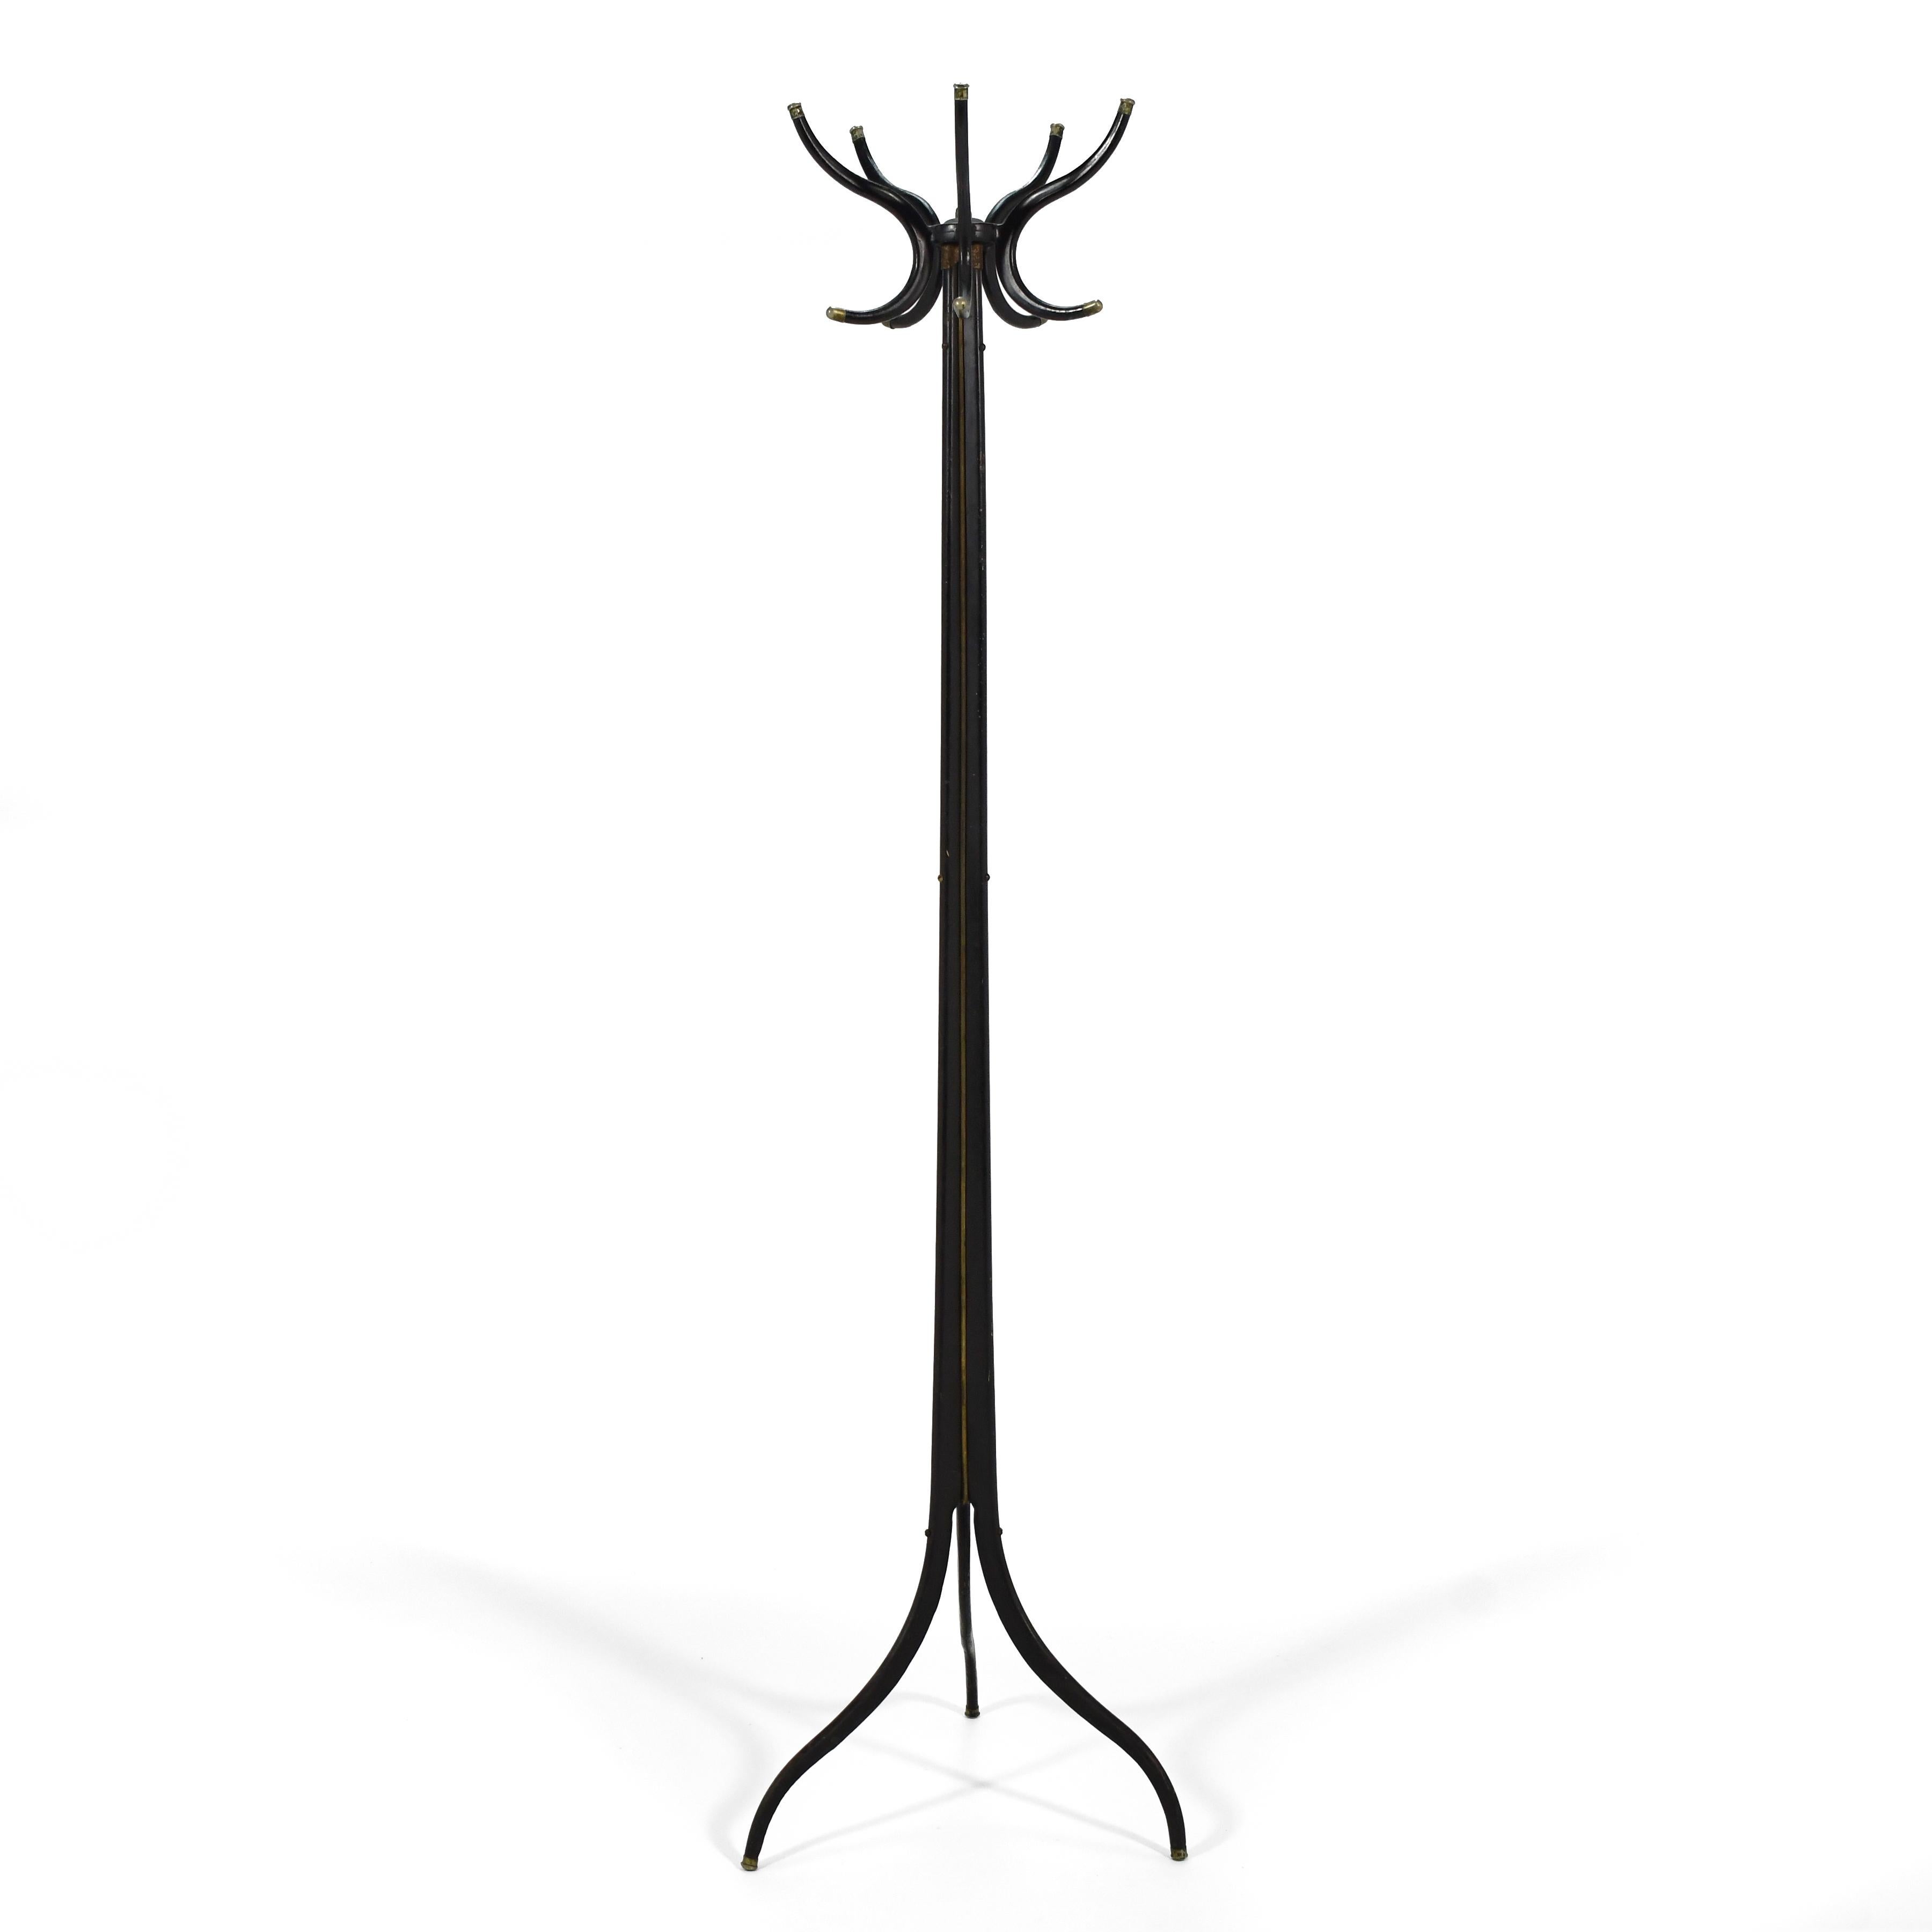 This elegant, sculptural coat rack is made of steel with a swiveling head and three legs that are swagged (tubular legs that are bent into a curve as they taper, using pressure) just like the famous design by Charles Pollock and Irving Harper for